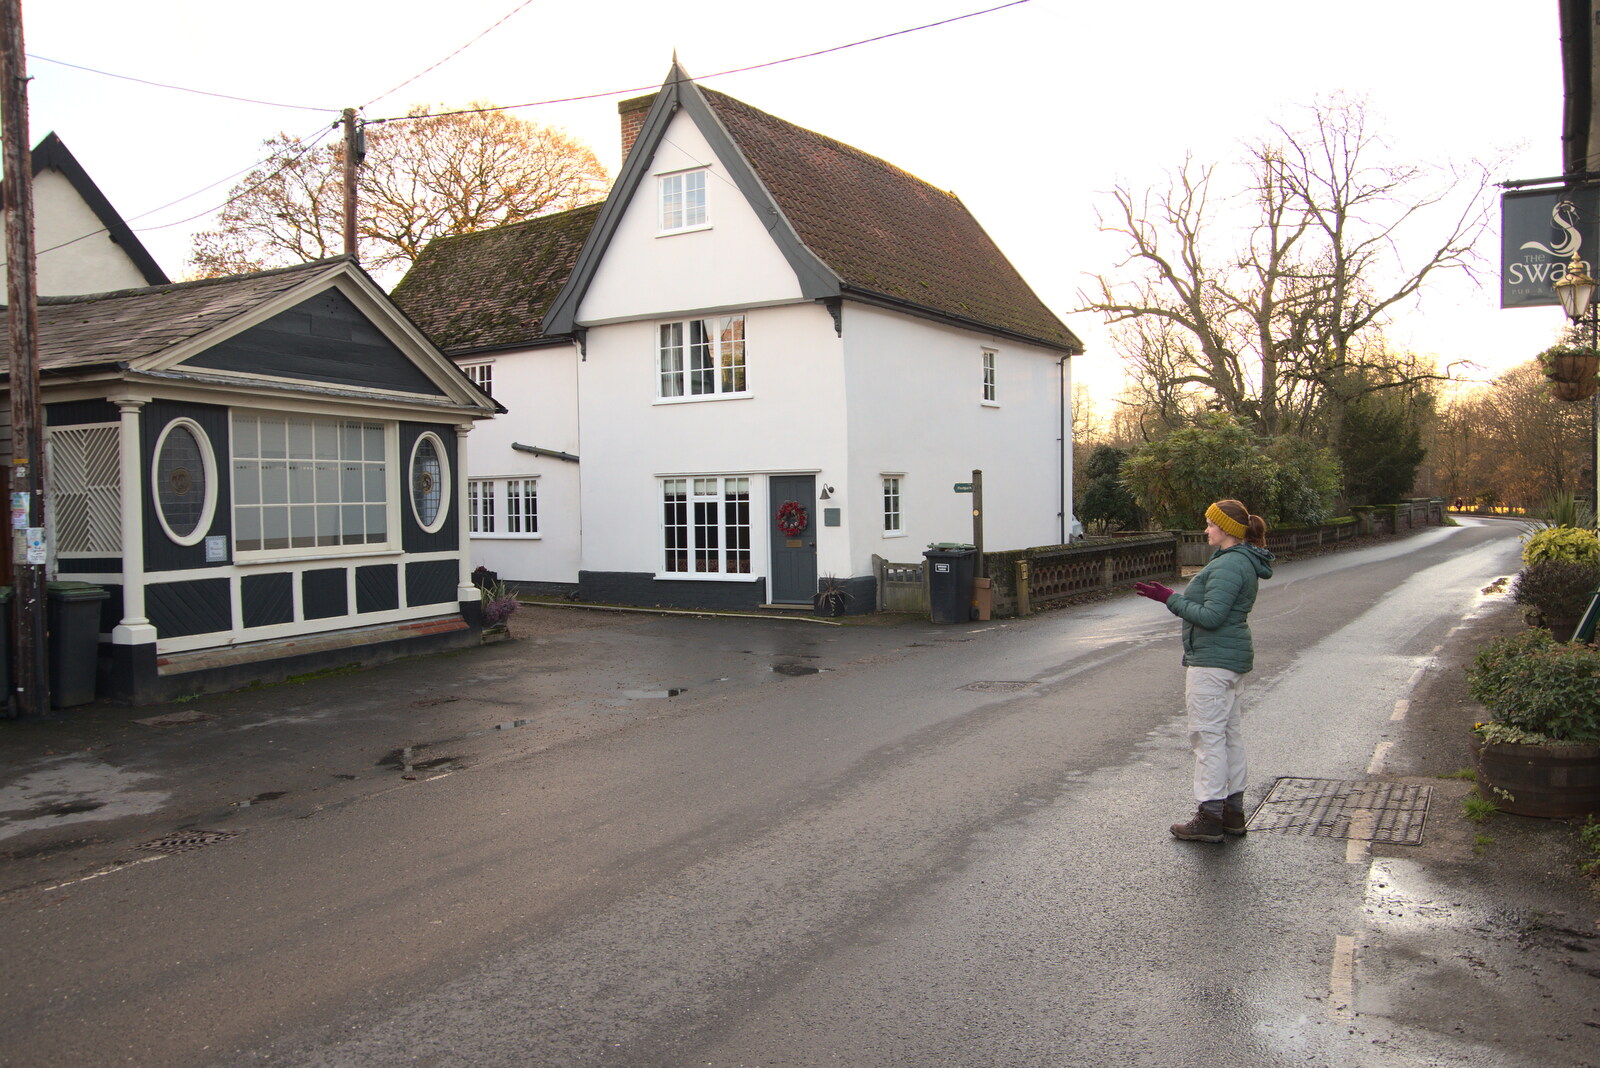 Winter Walks around Brome and Hoxne, Suffolk - 2nd January 2023: Isobel on the street